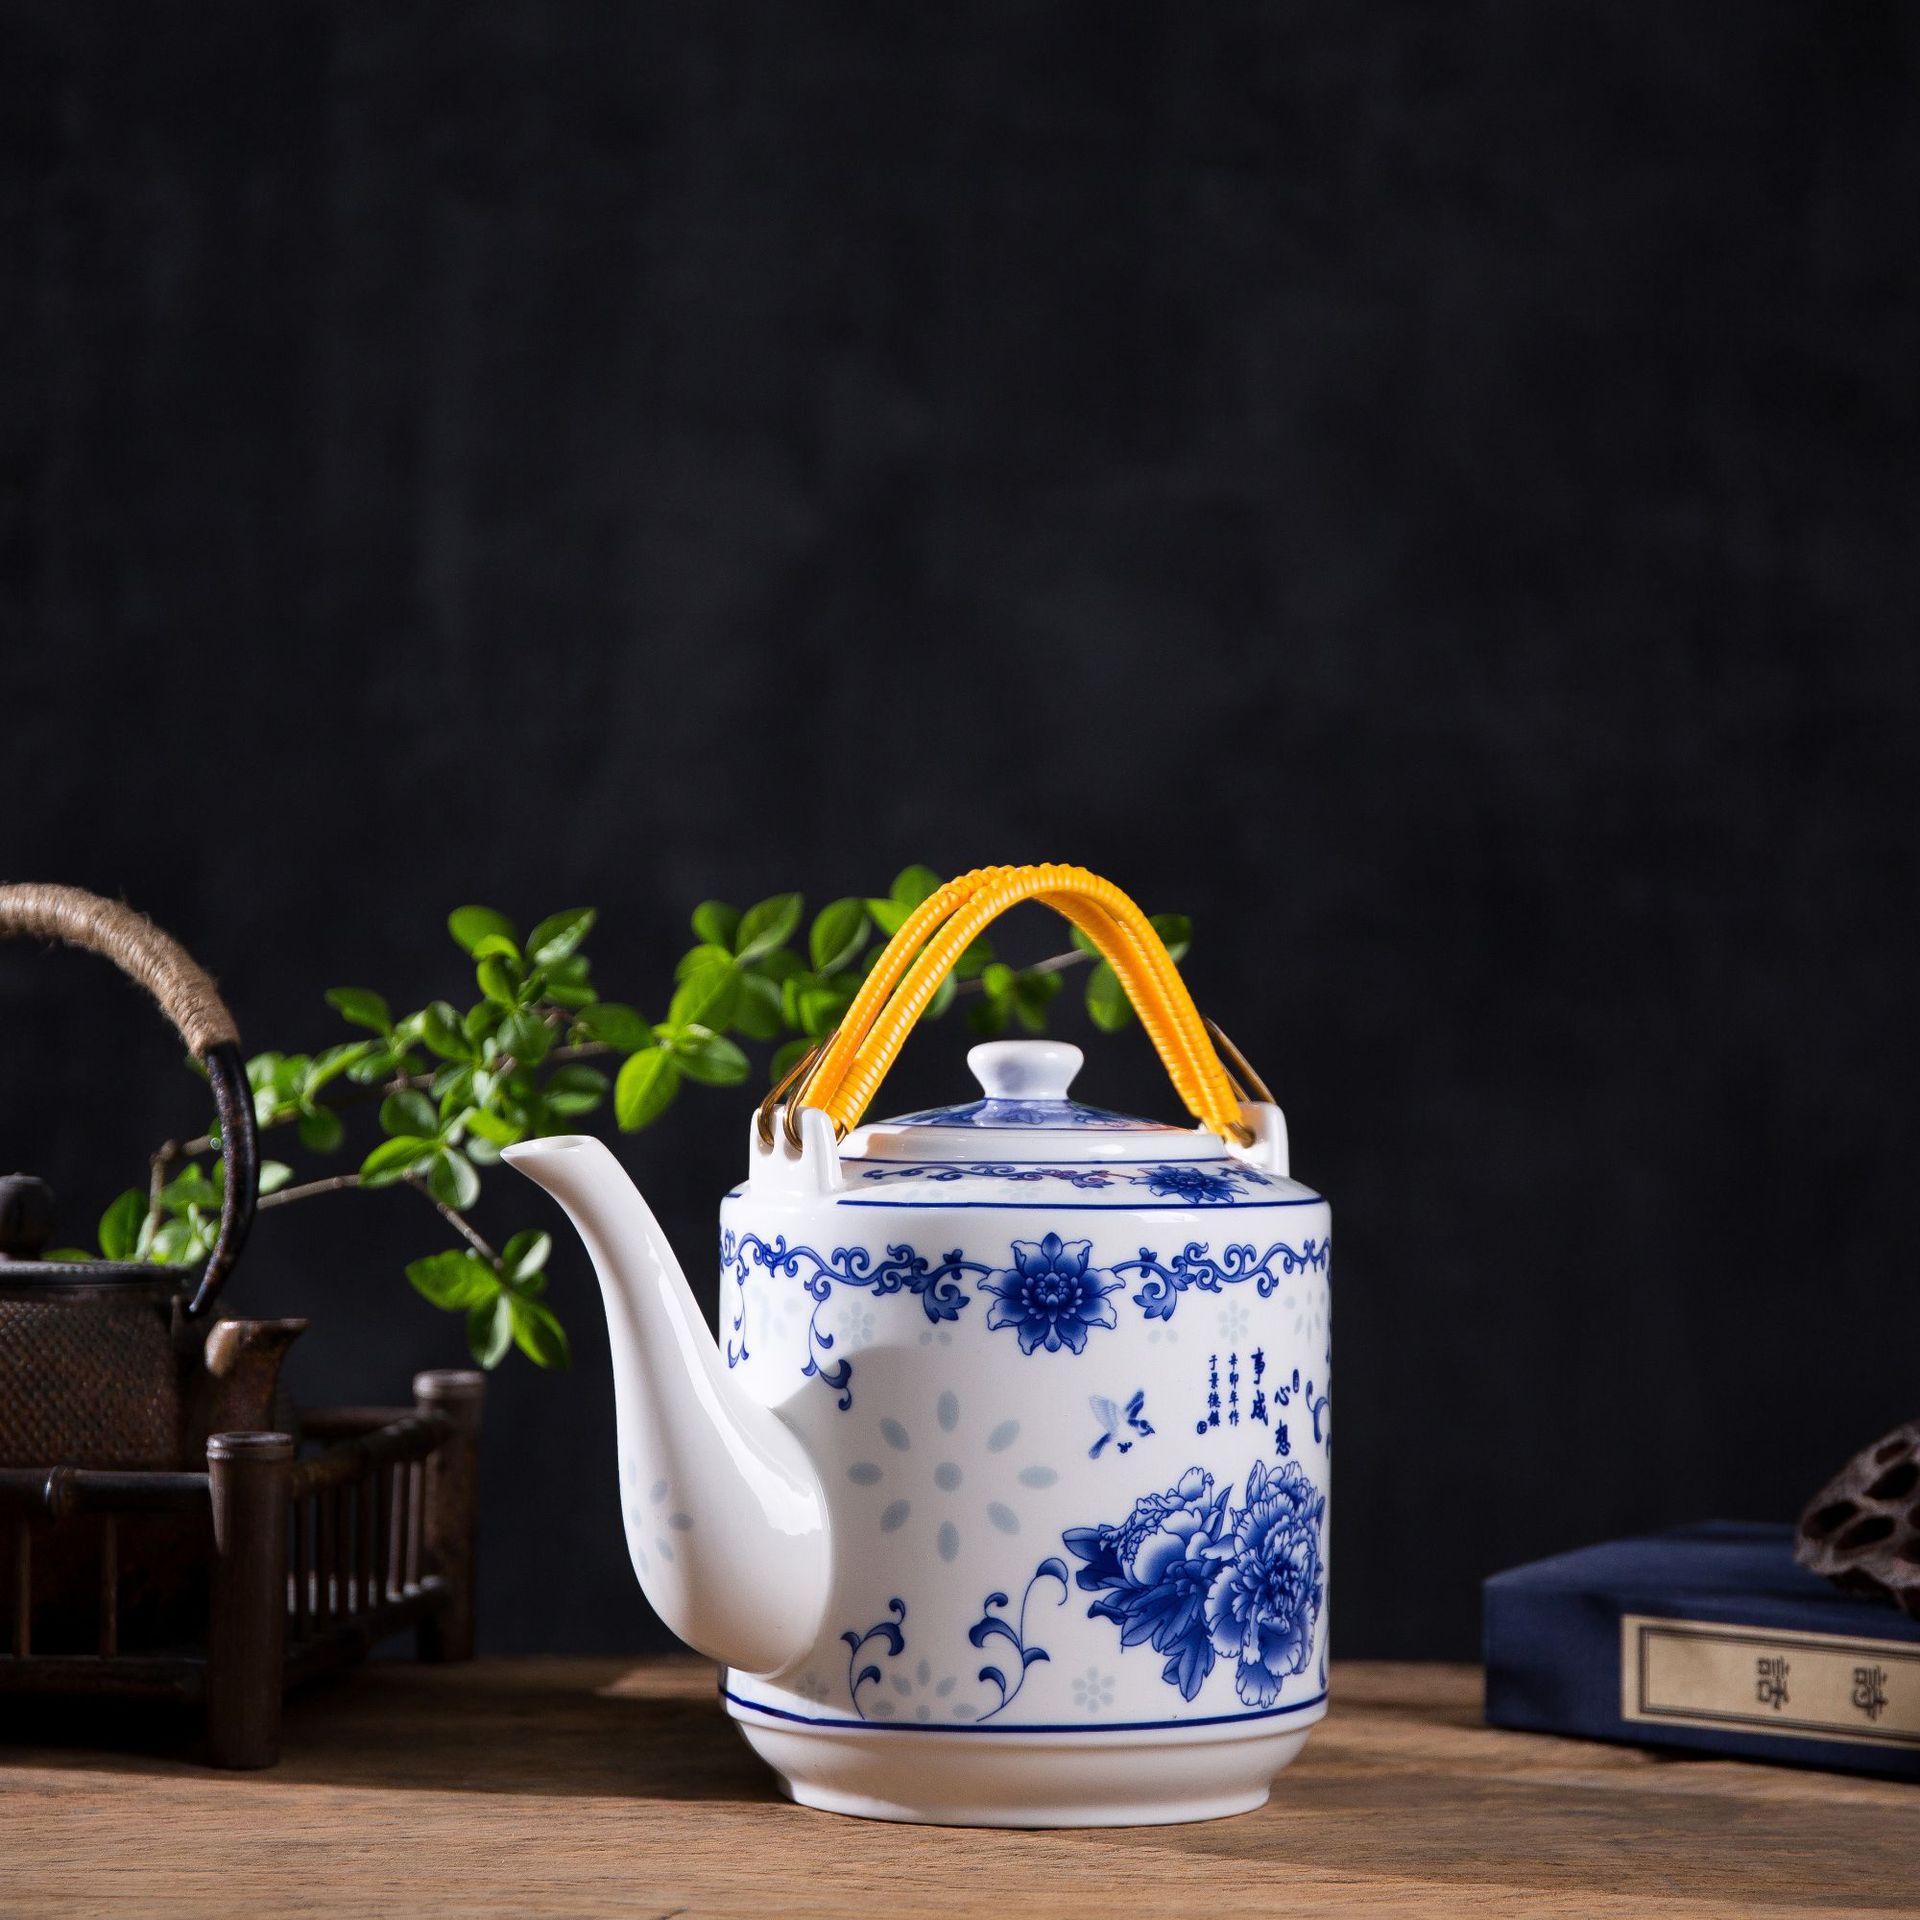 Jingdezhen Ceramic Teapot High Temperature Resistant Blue and White Loop-Handled Teapot Large Capacity Household Chinese Kung Fu Tea Set Suit Wholesale